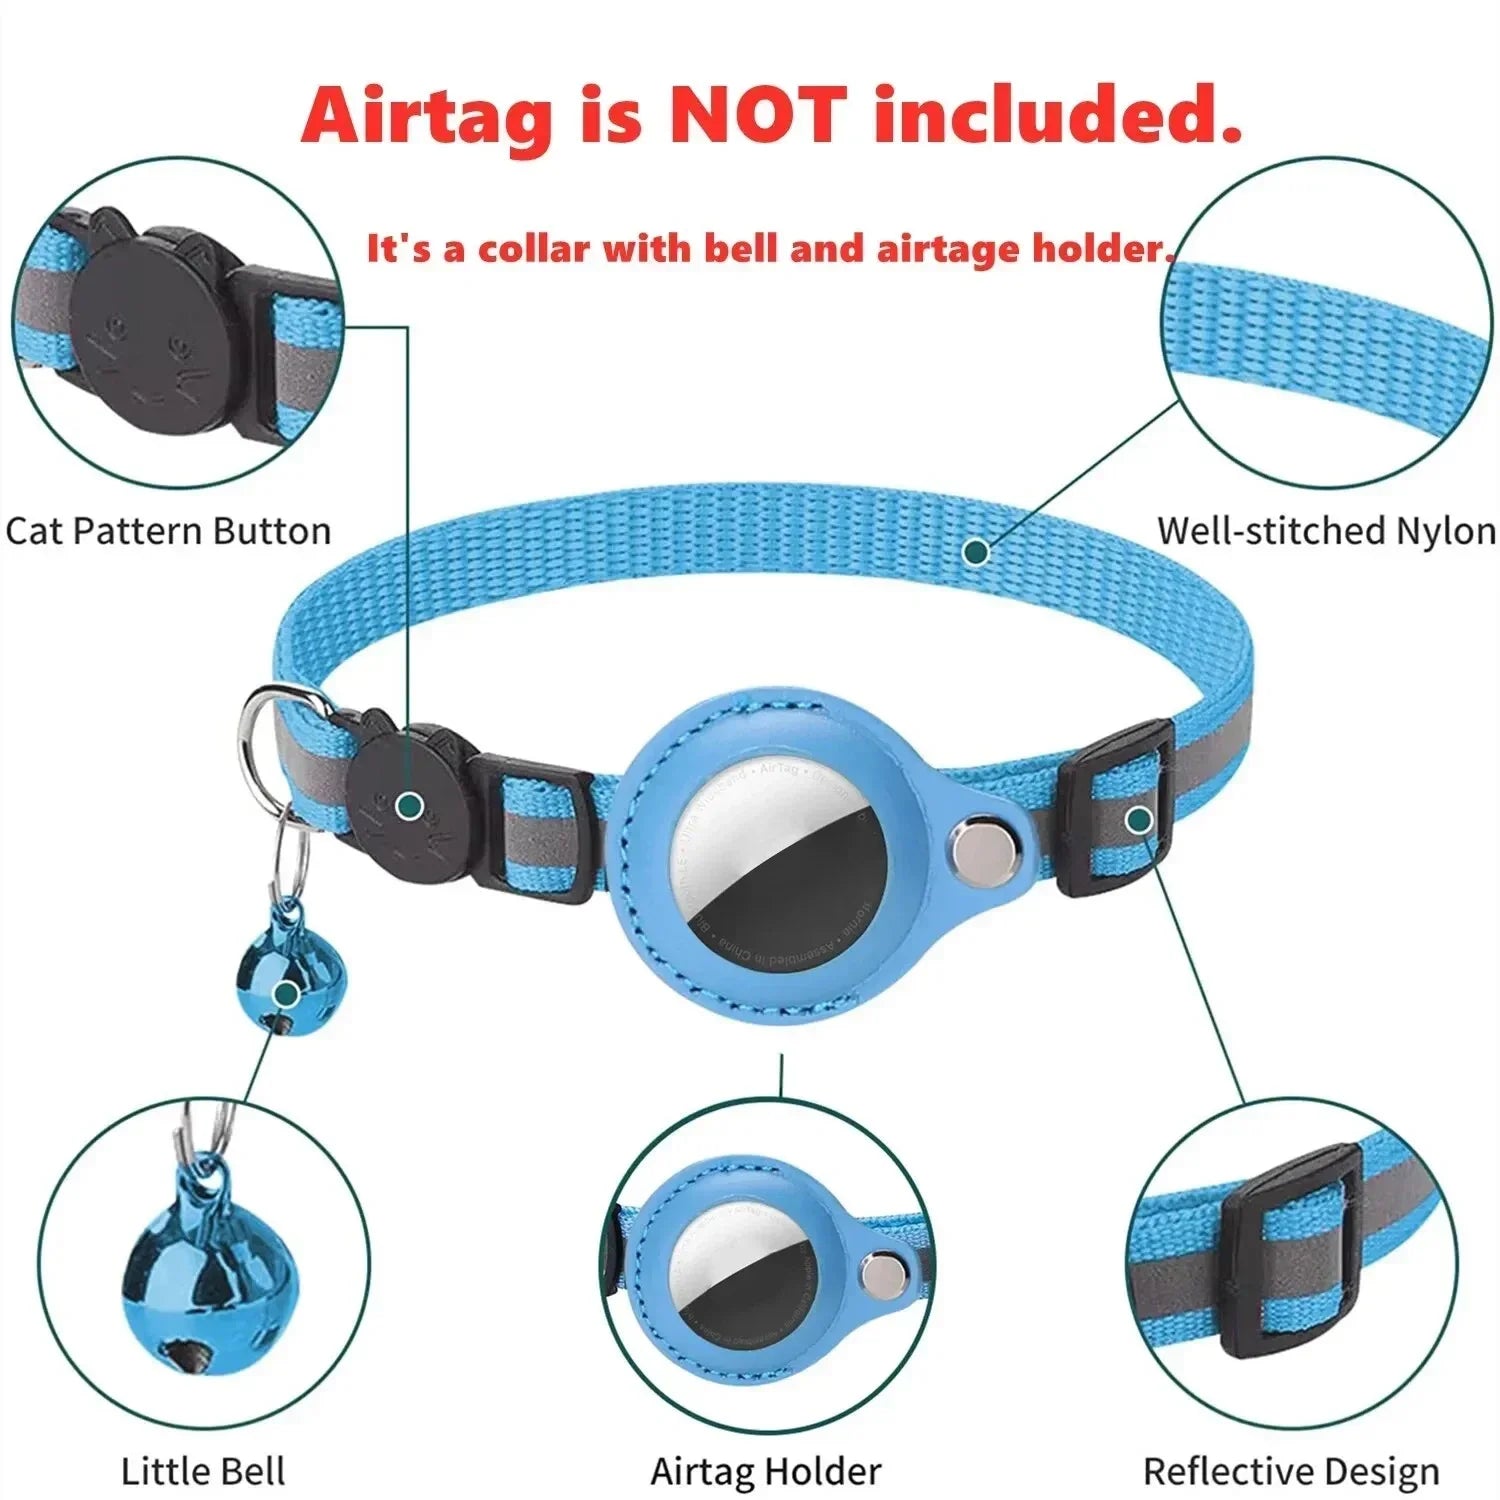 Anti-Lost Cat Collar with GPS Tracker & Bell: Stylish Safety for Your Feline  petlums.com   